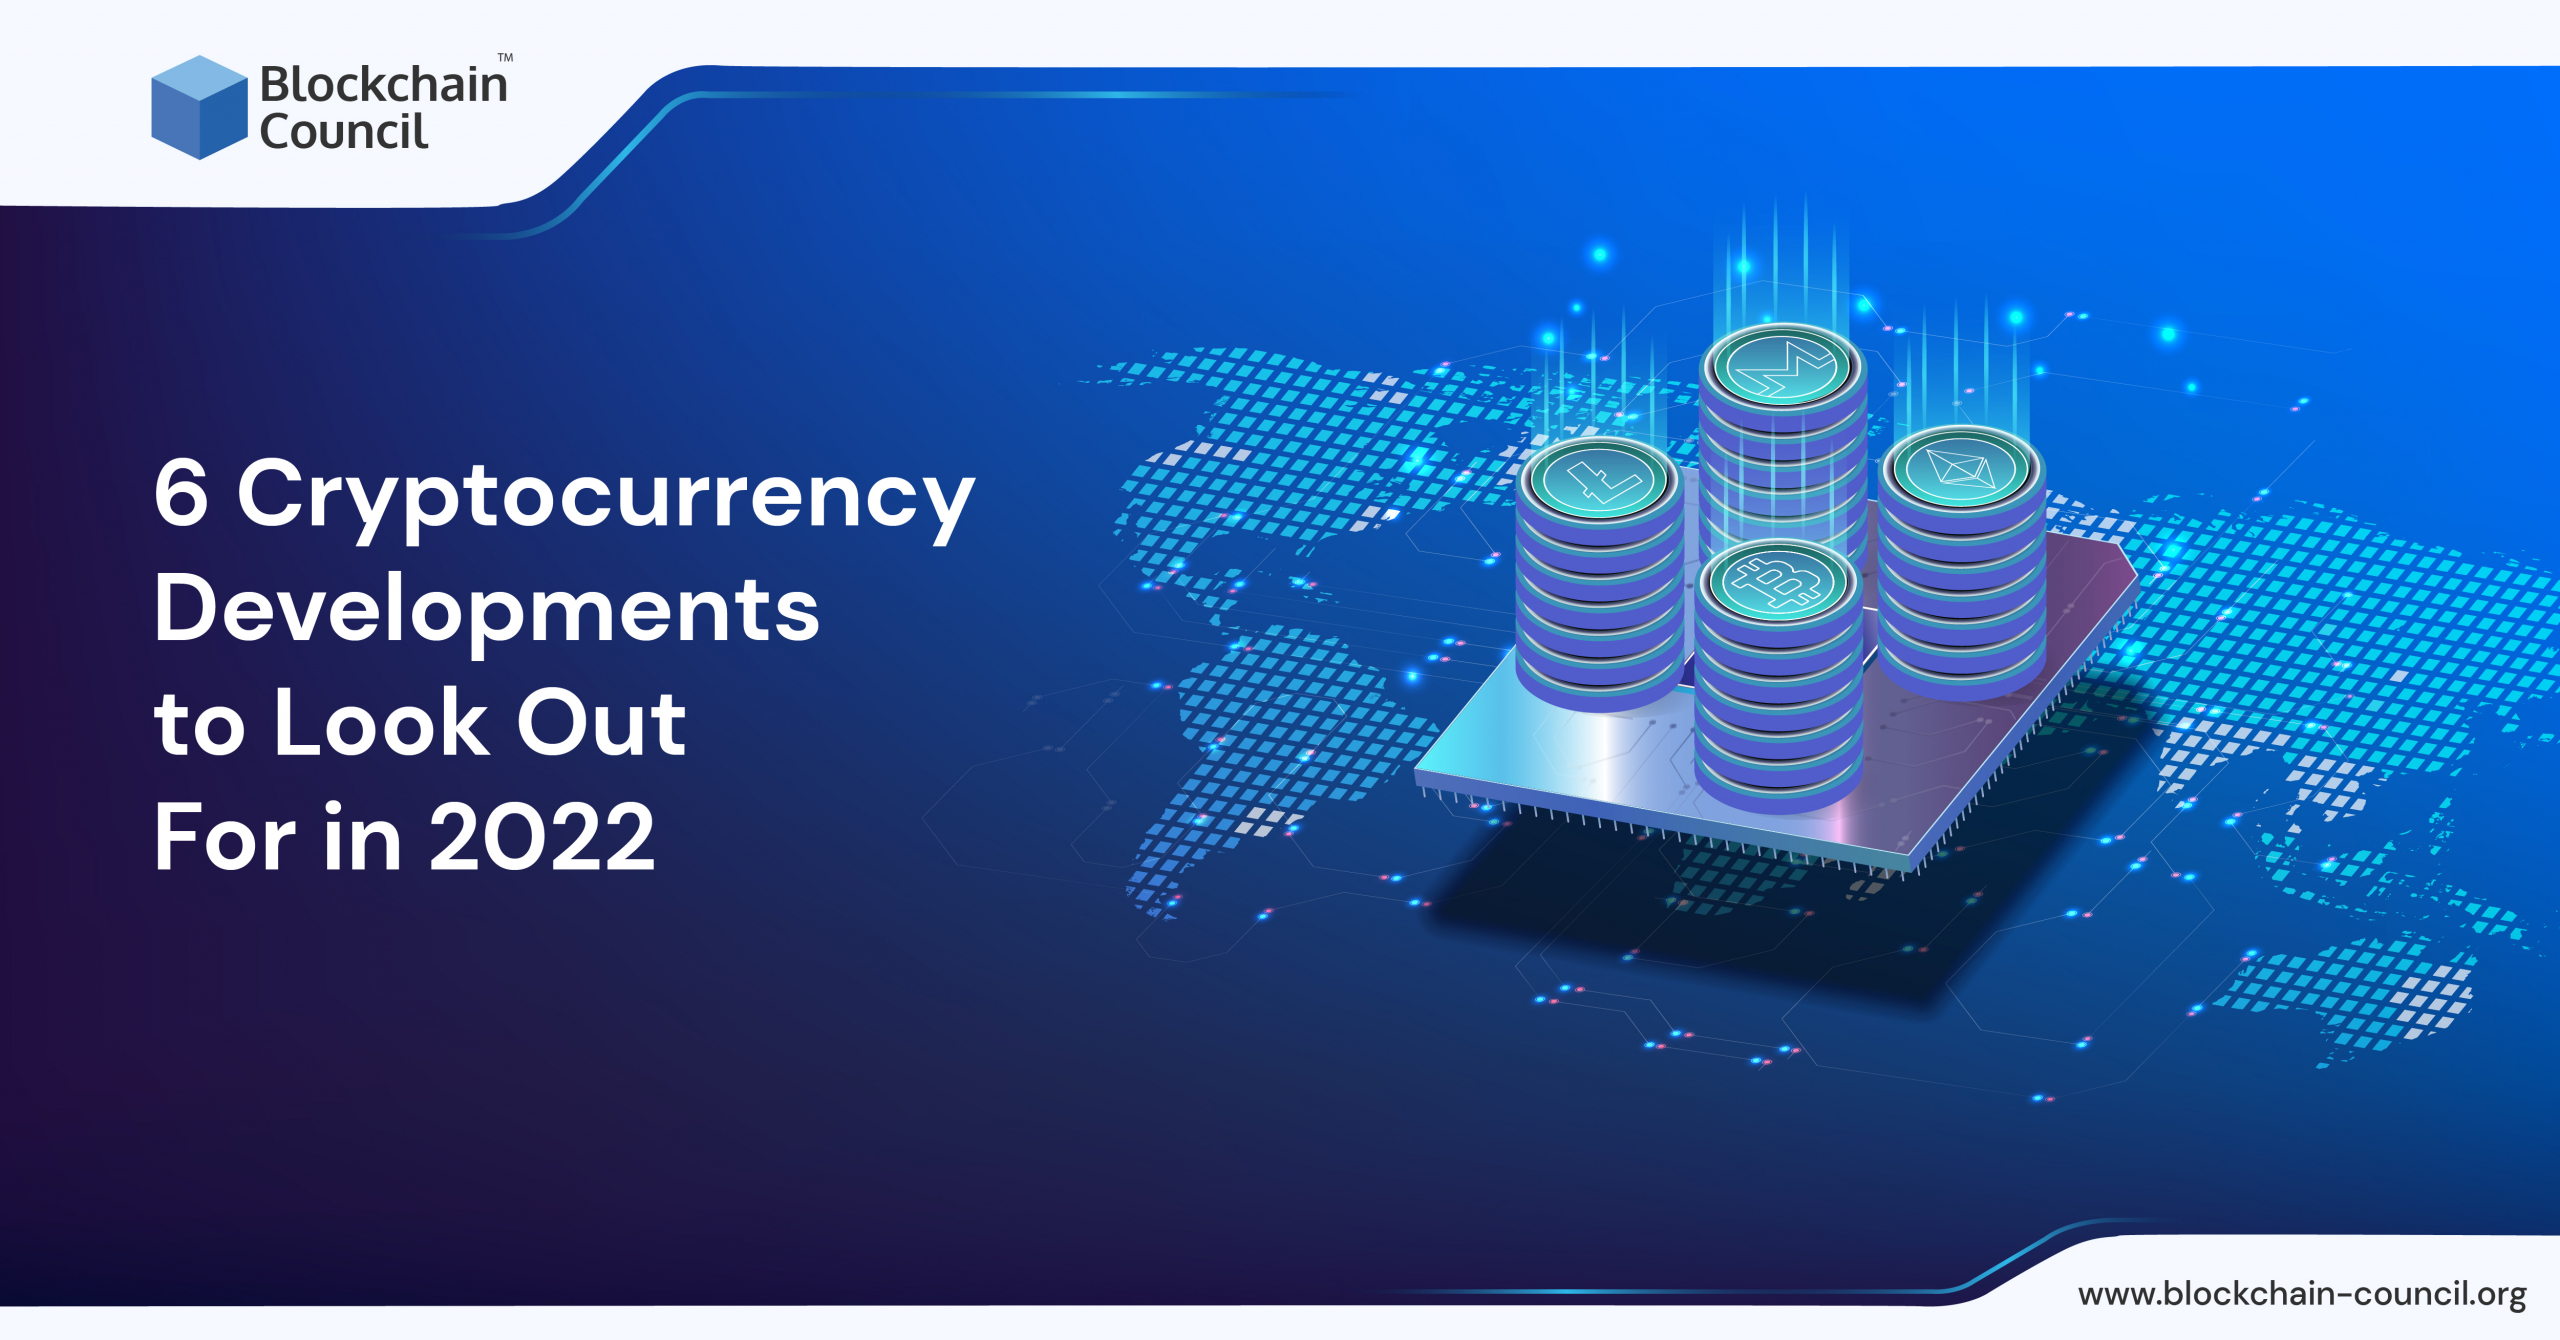 6 Cryptocurrency Developments to Look Out For in 2022